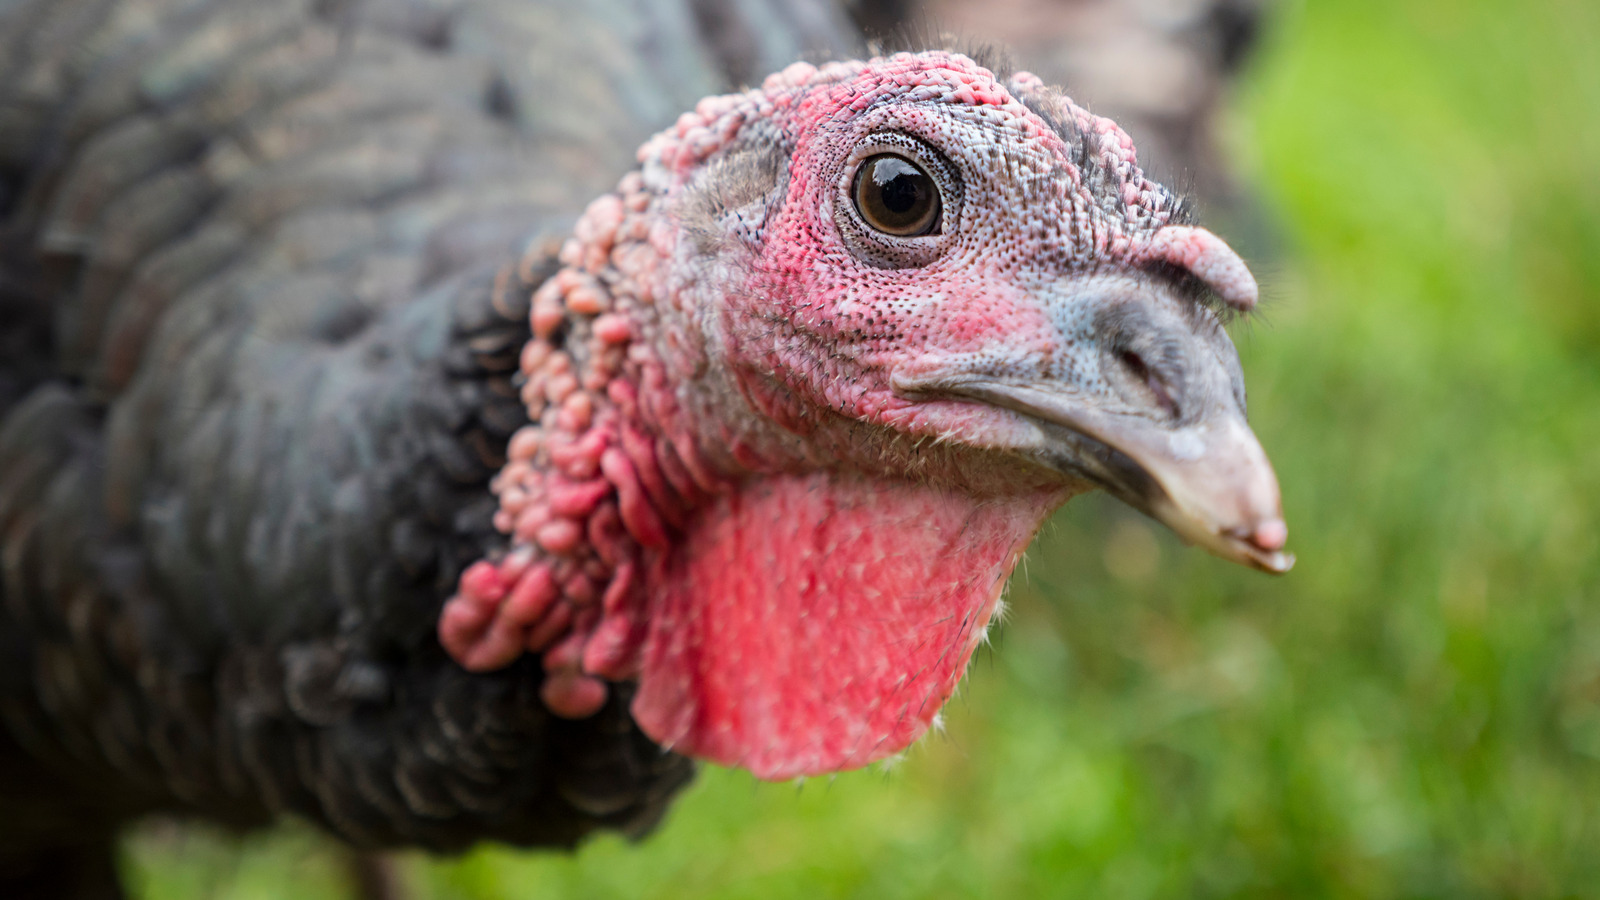 Do Turkeys Have White Feathers